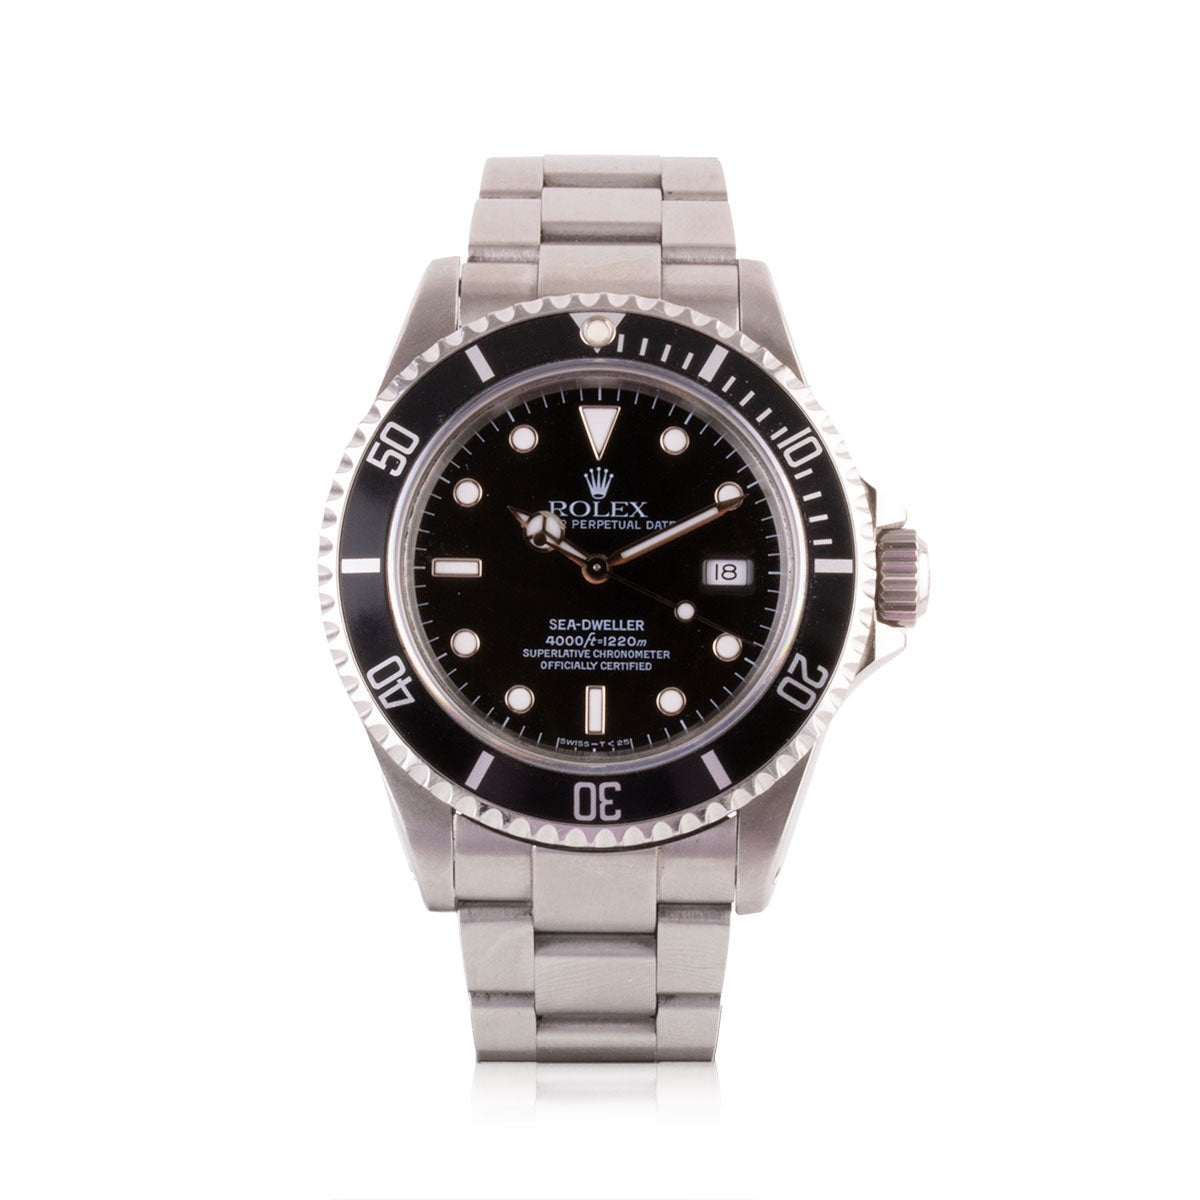 Second-hand watch - Rolex - Oyster Perpetual Date Sea-Dweller - 10400€